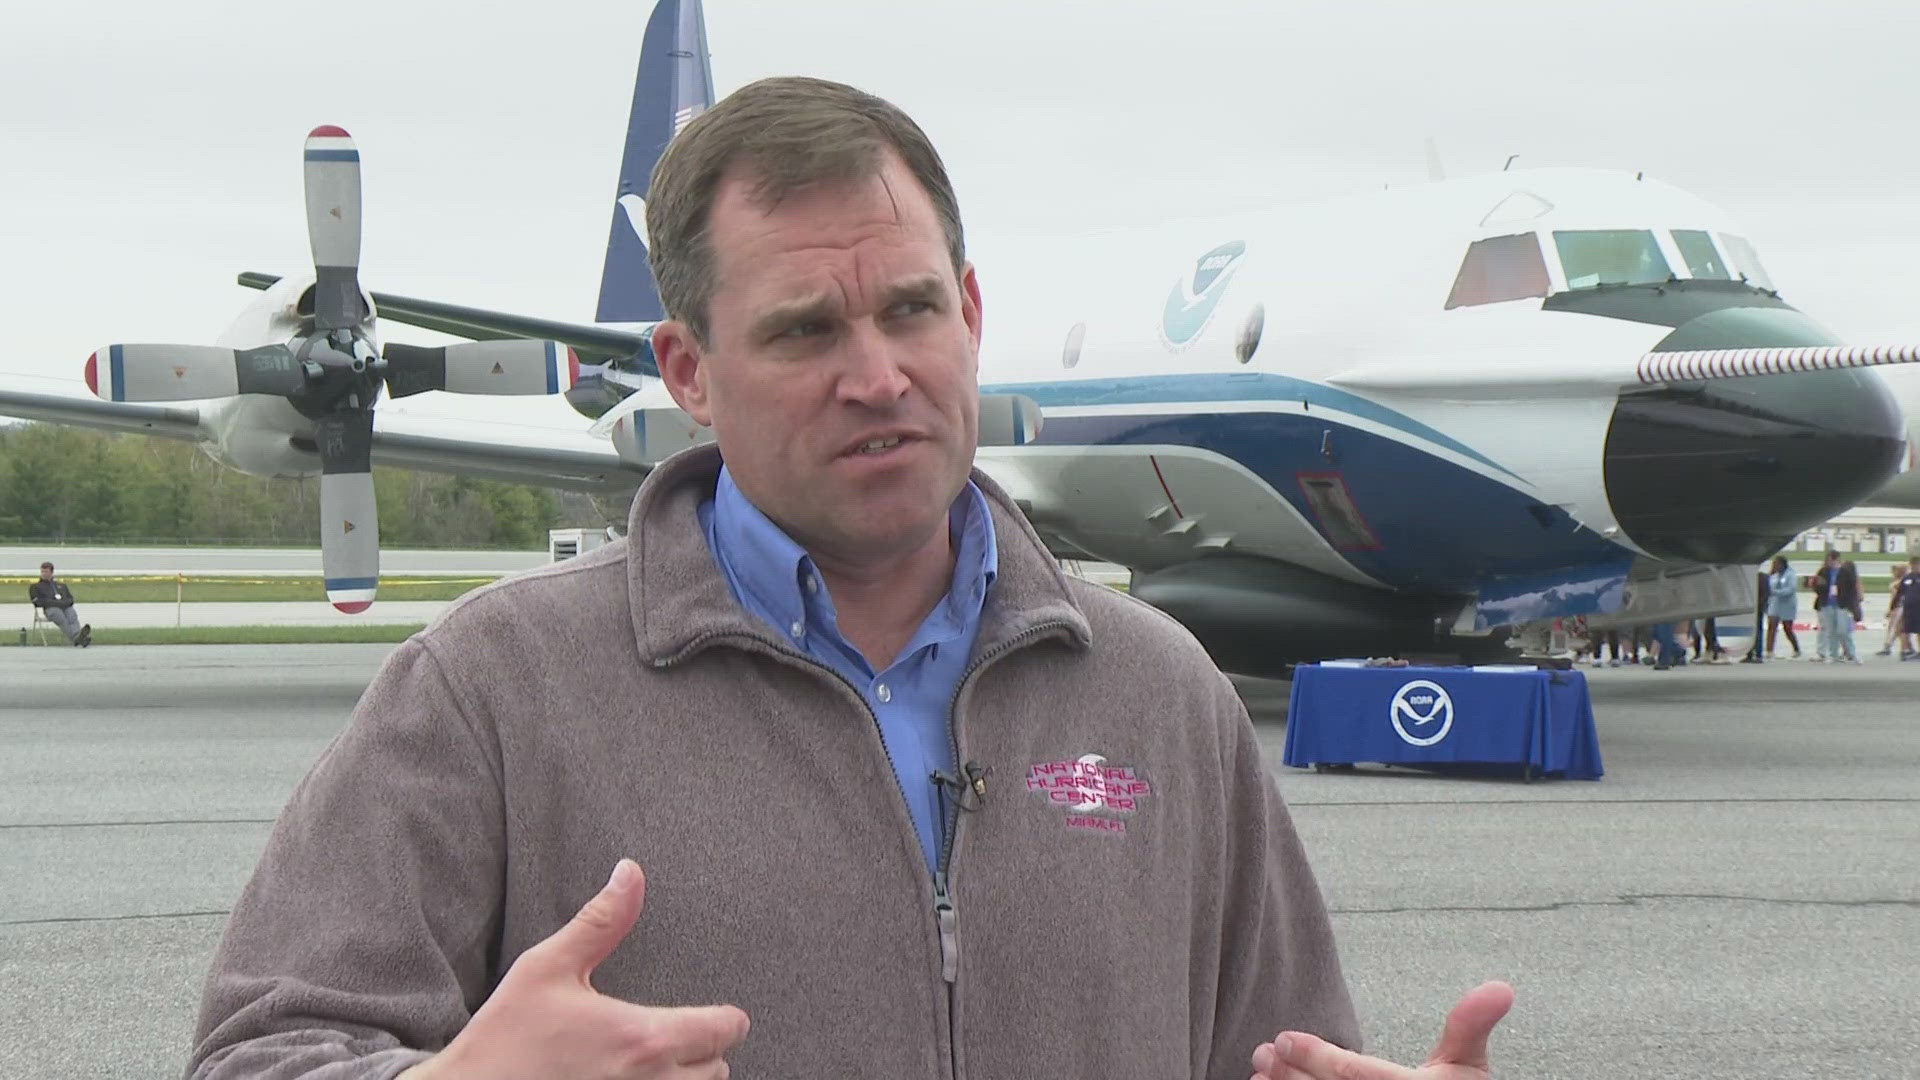 NOAA's Hurricane Awareness Tour made a stop in Portland to help educate people about potential risks, even for places that rarely get hit by tropical storms.